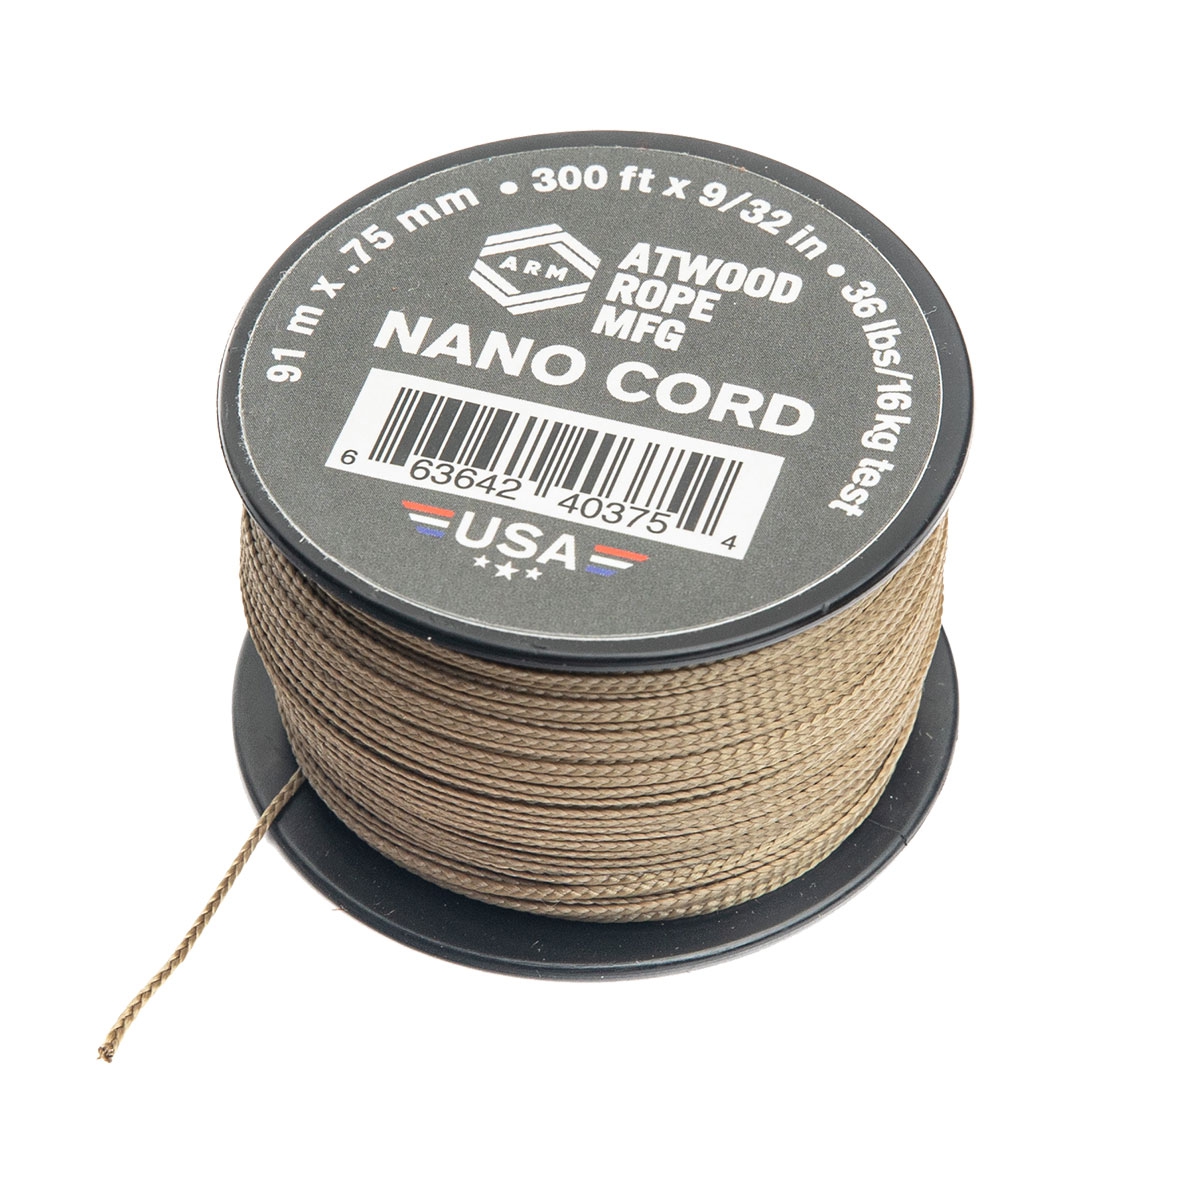 Atwood Rope .75 mm Nano Cord, 91 m / 300 ft, Coyote Brown